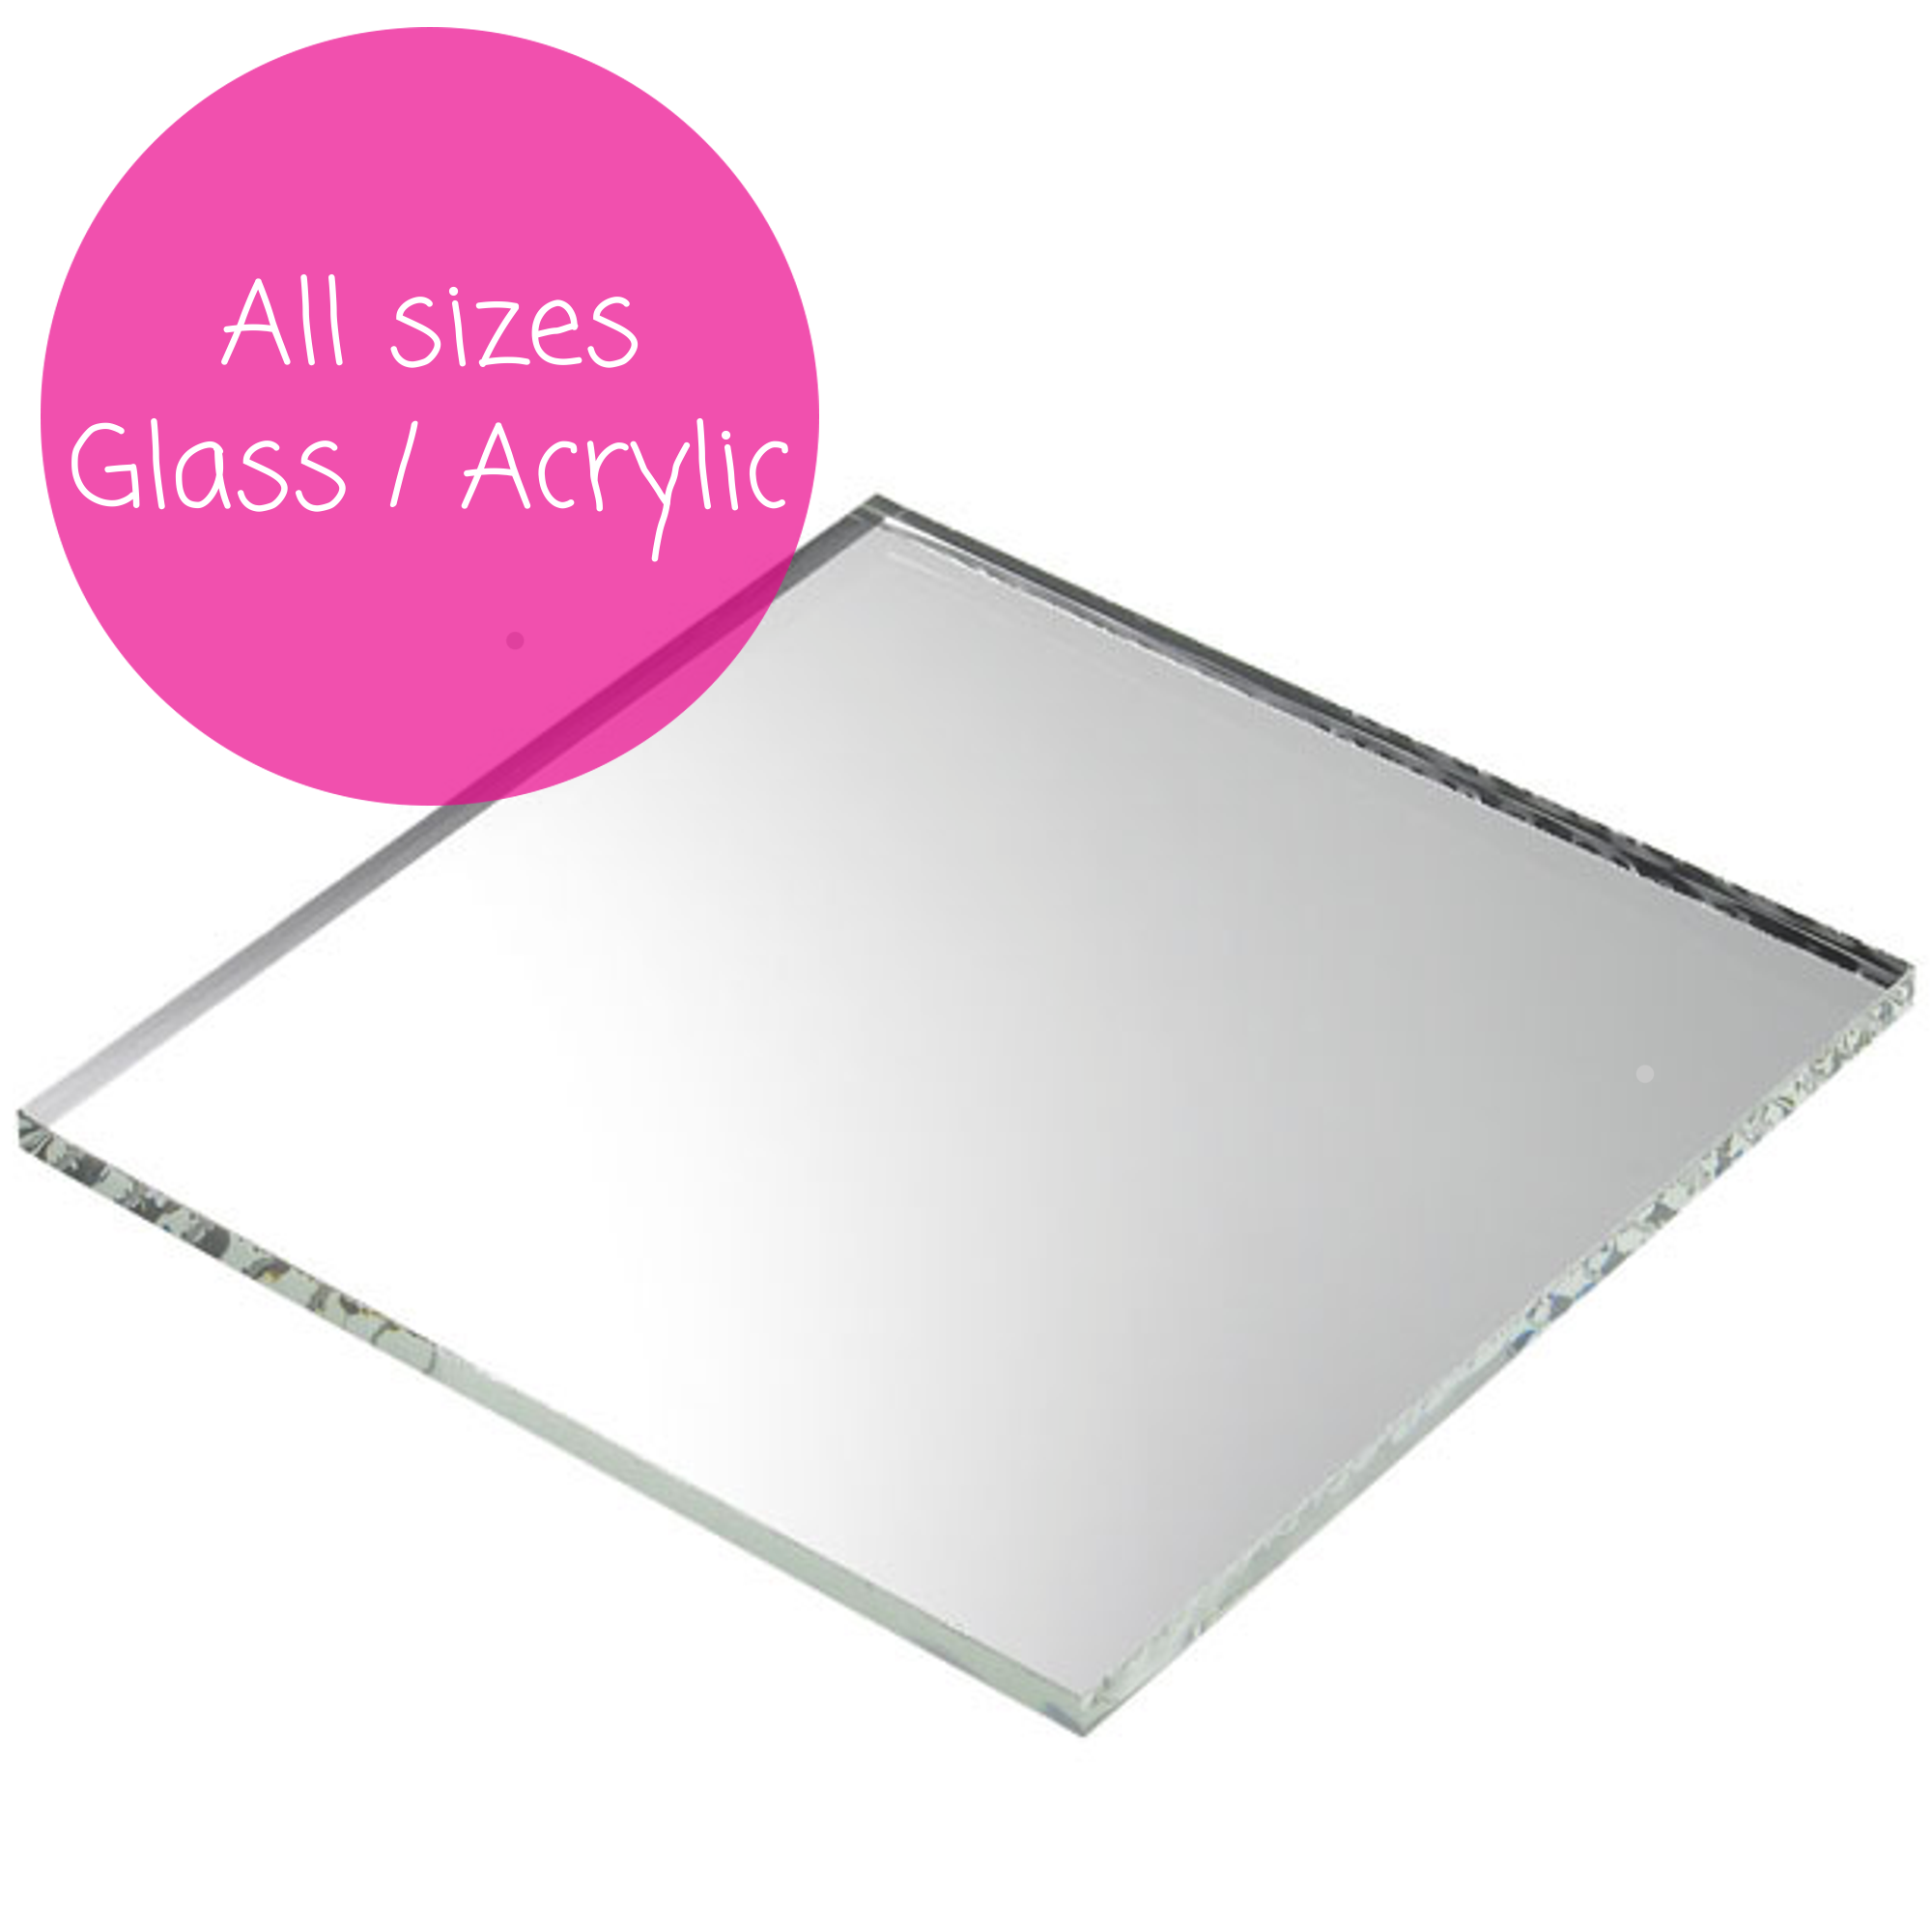 Glass or Acrylic Styrene for Picture Frame Photo Framing Spare Replacement